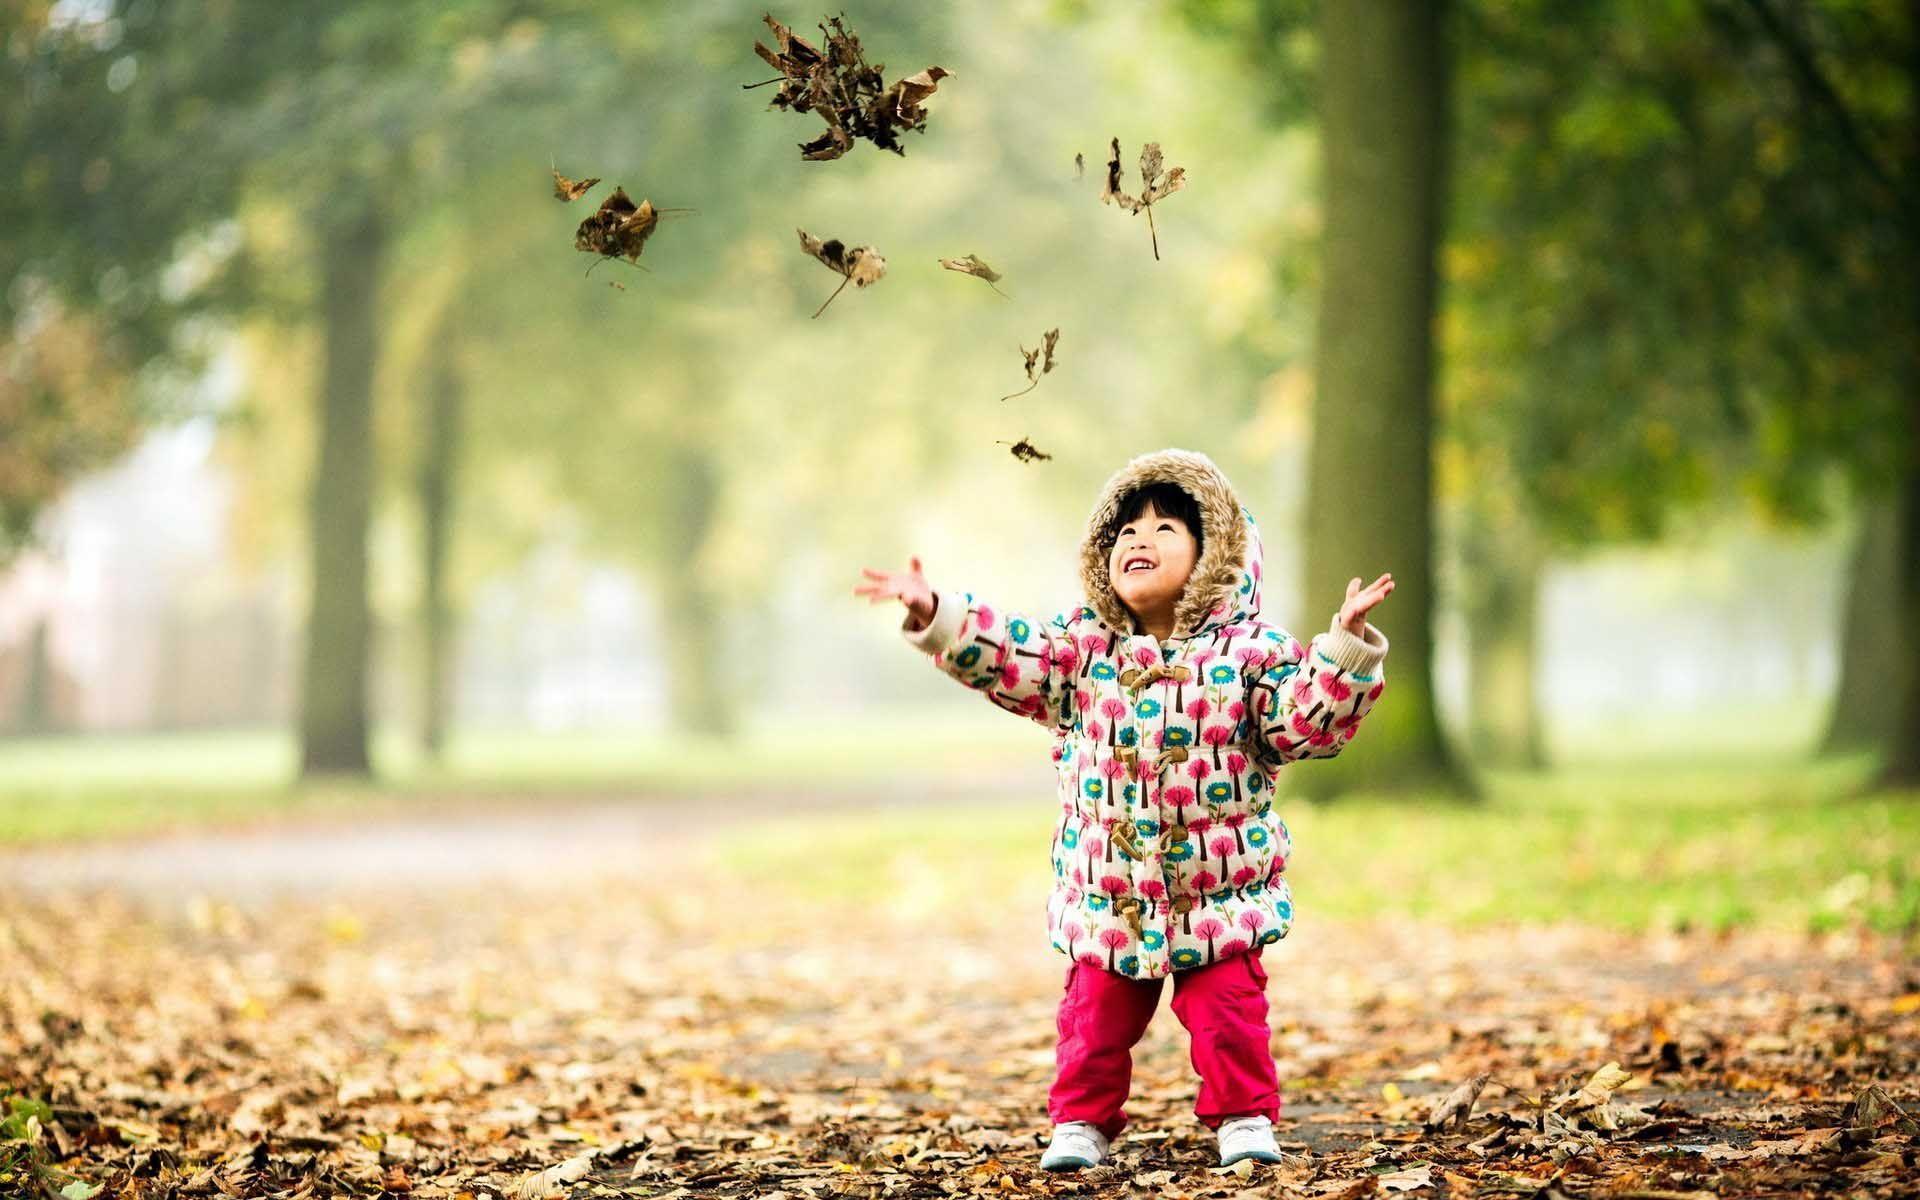 Child Happy Autumn Leaves Wallpaper. HD Cute Wallpaper for Mobile